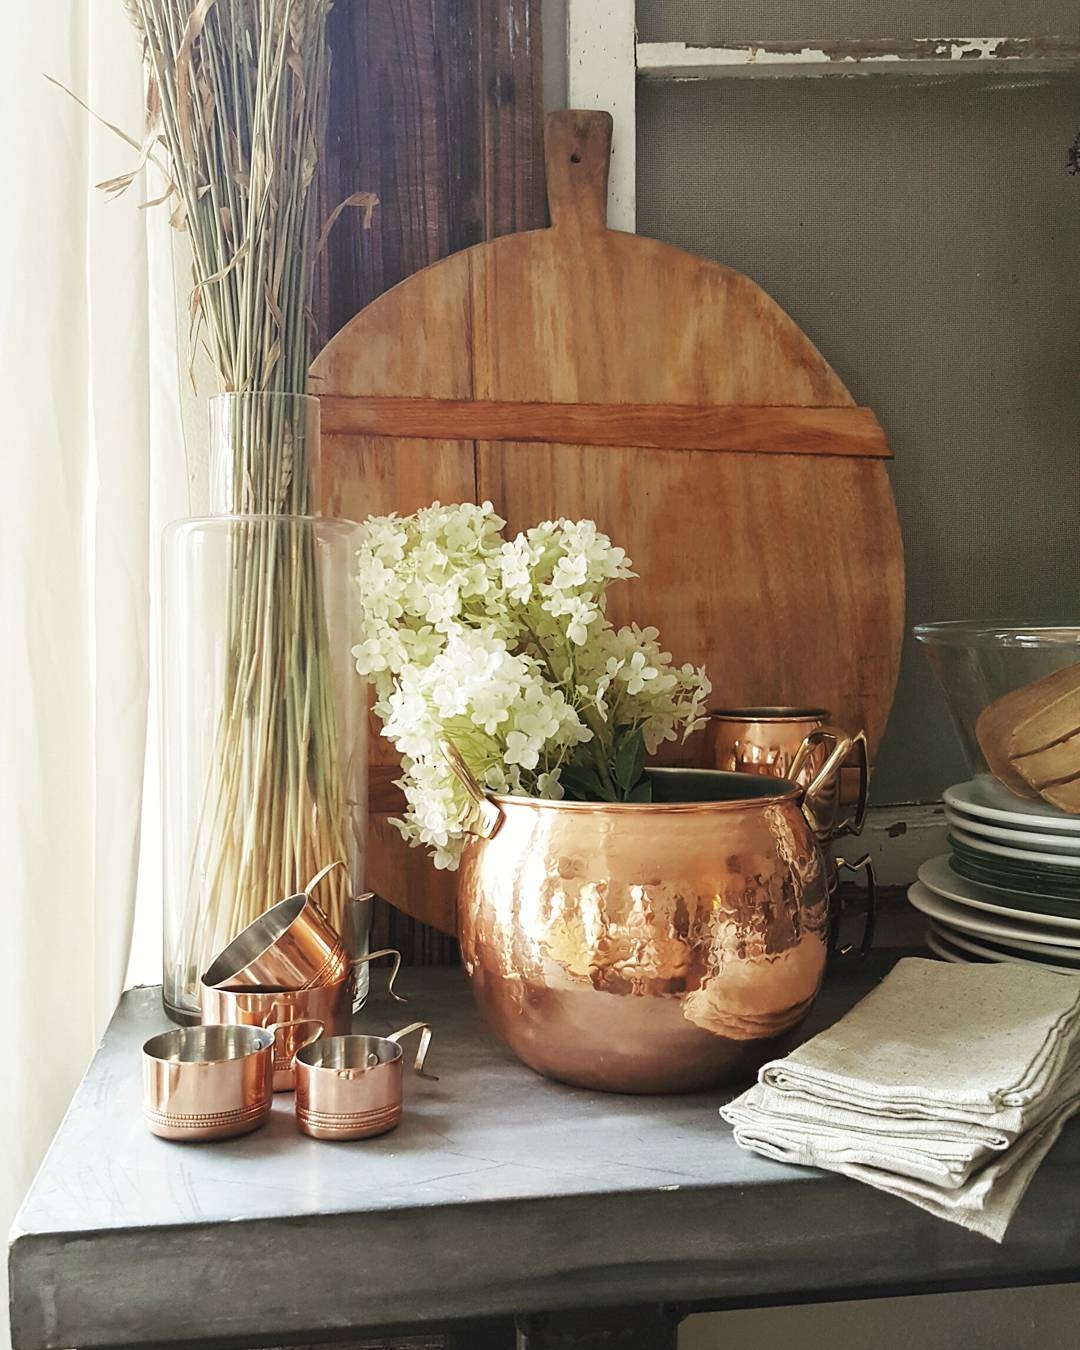 Country Farmhouse Kitchen White Tulips Flowers Wood Spoons Bread Boards Concrete Table Copper Hydrangea Metrie Moulding Molding Baskets Country Living Decor Design